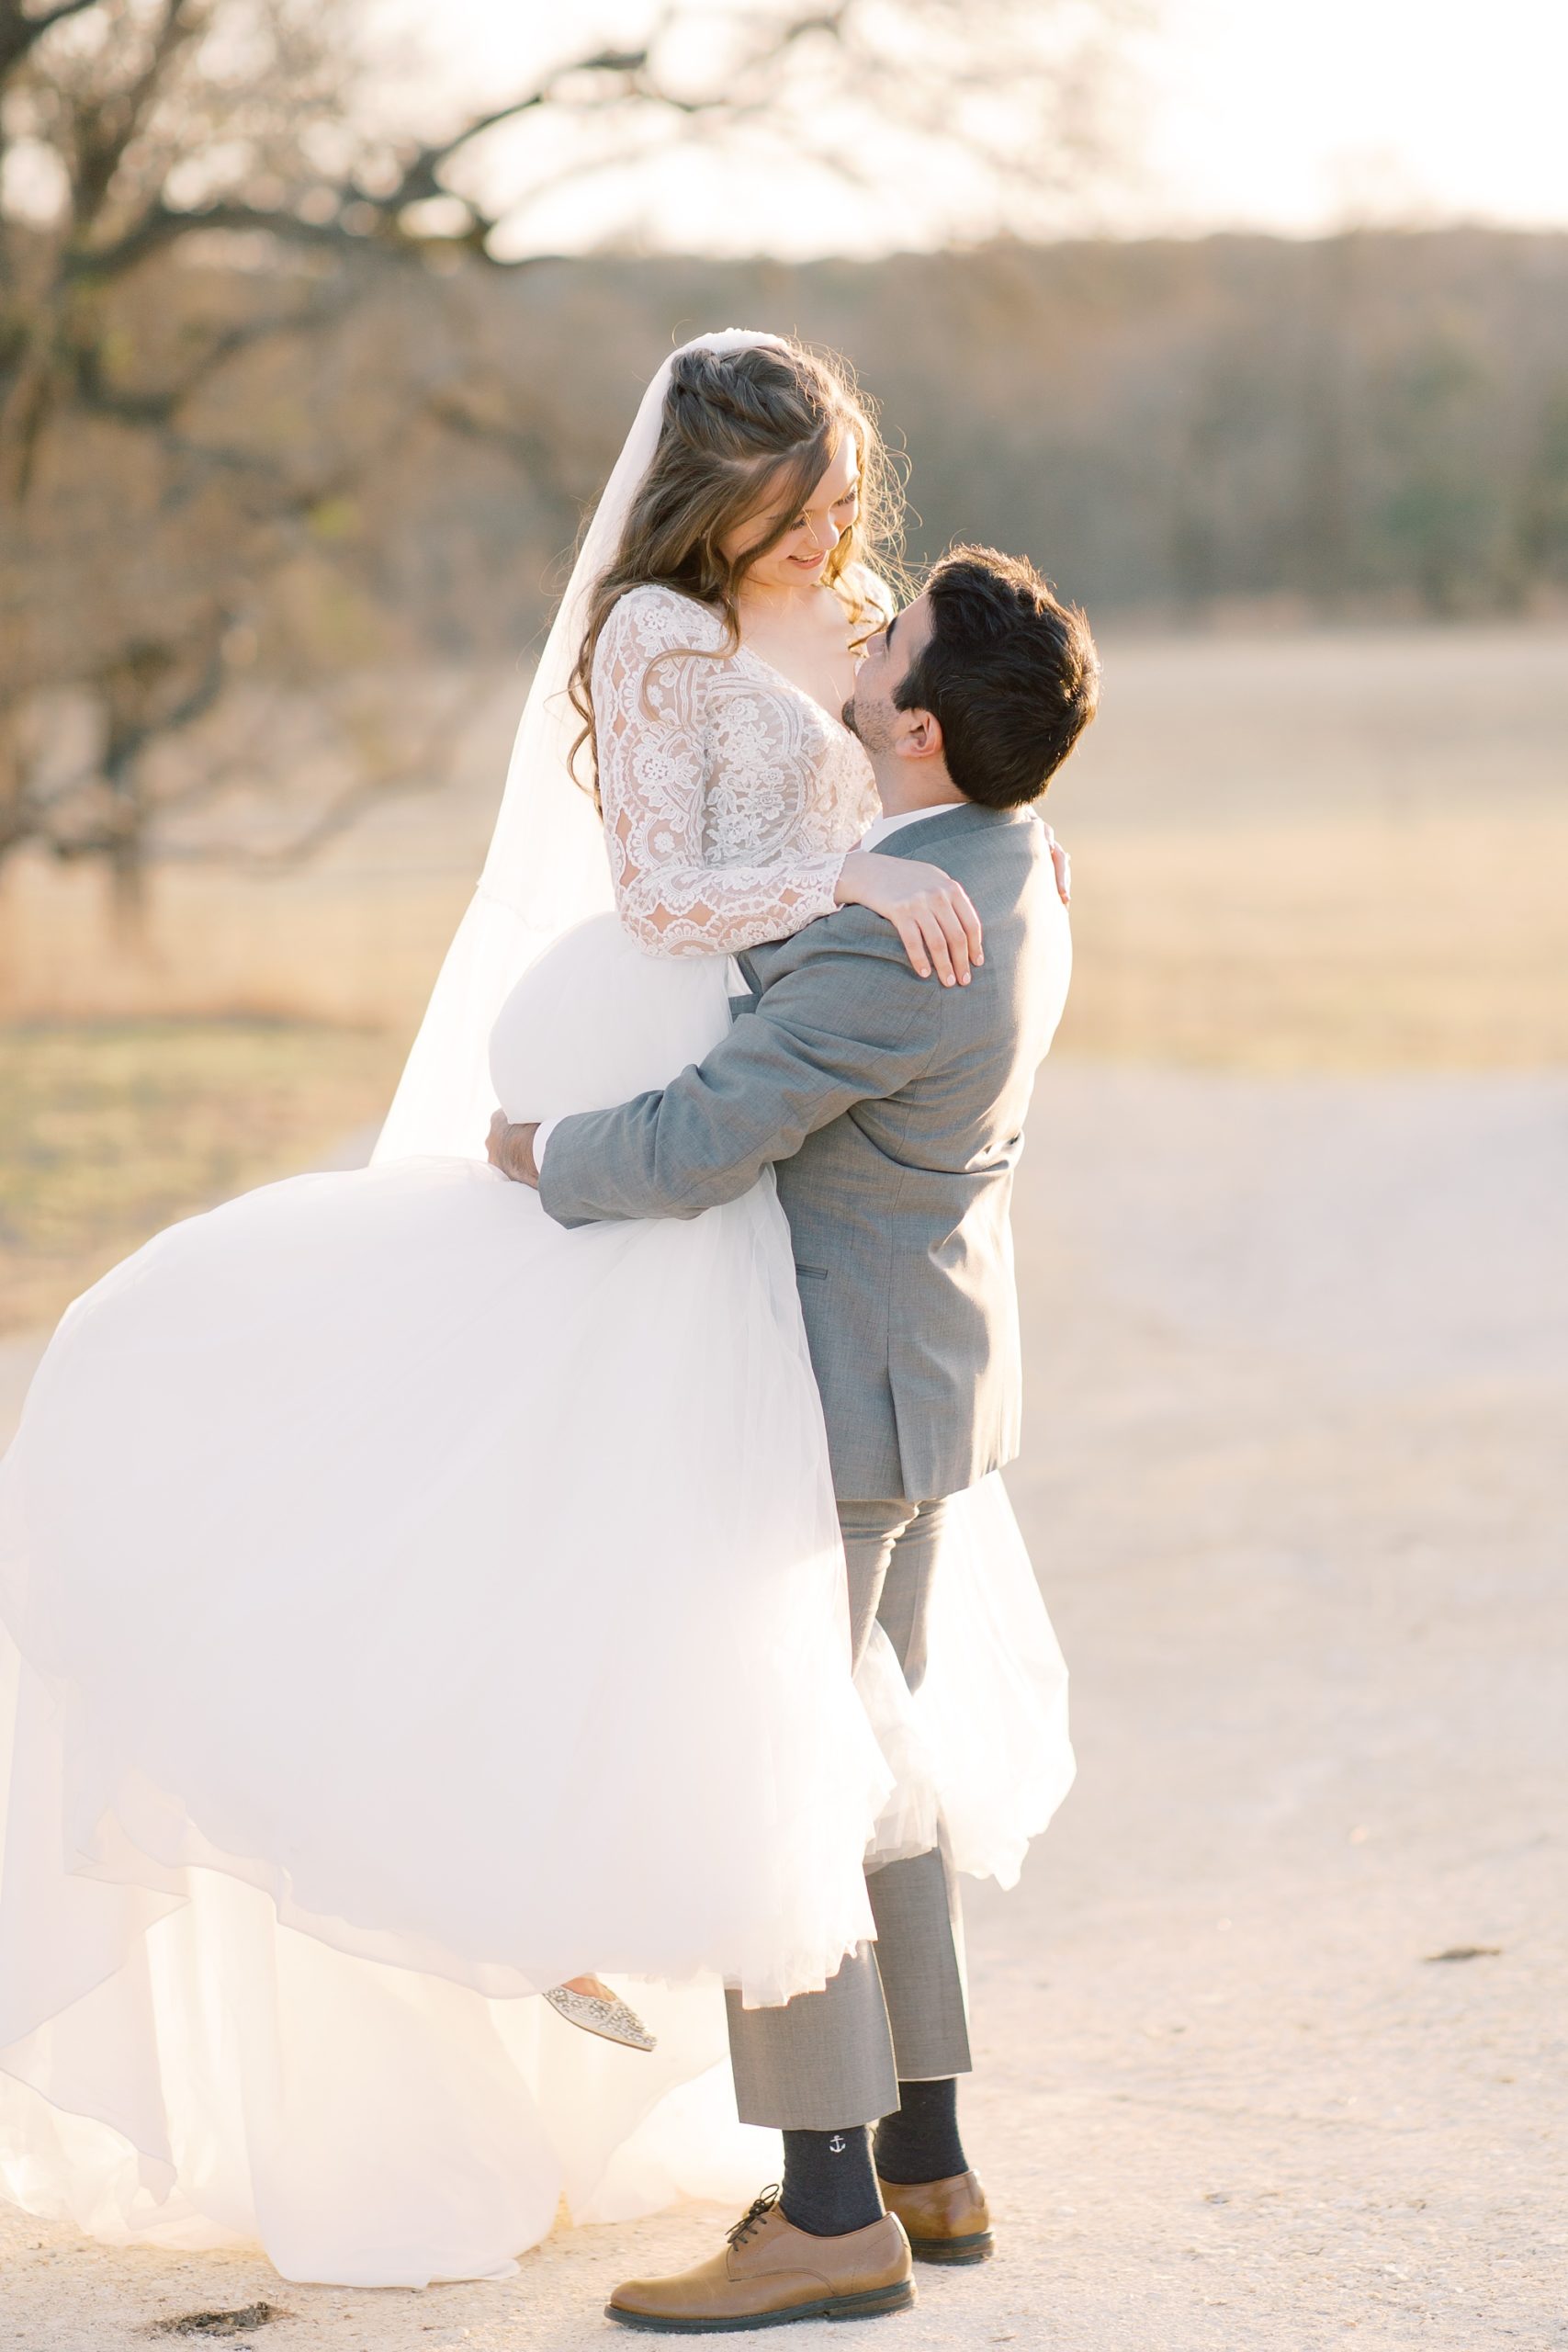 groom lifts bride during sunset wedding portraits outside HighPointe Estate